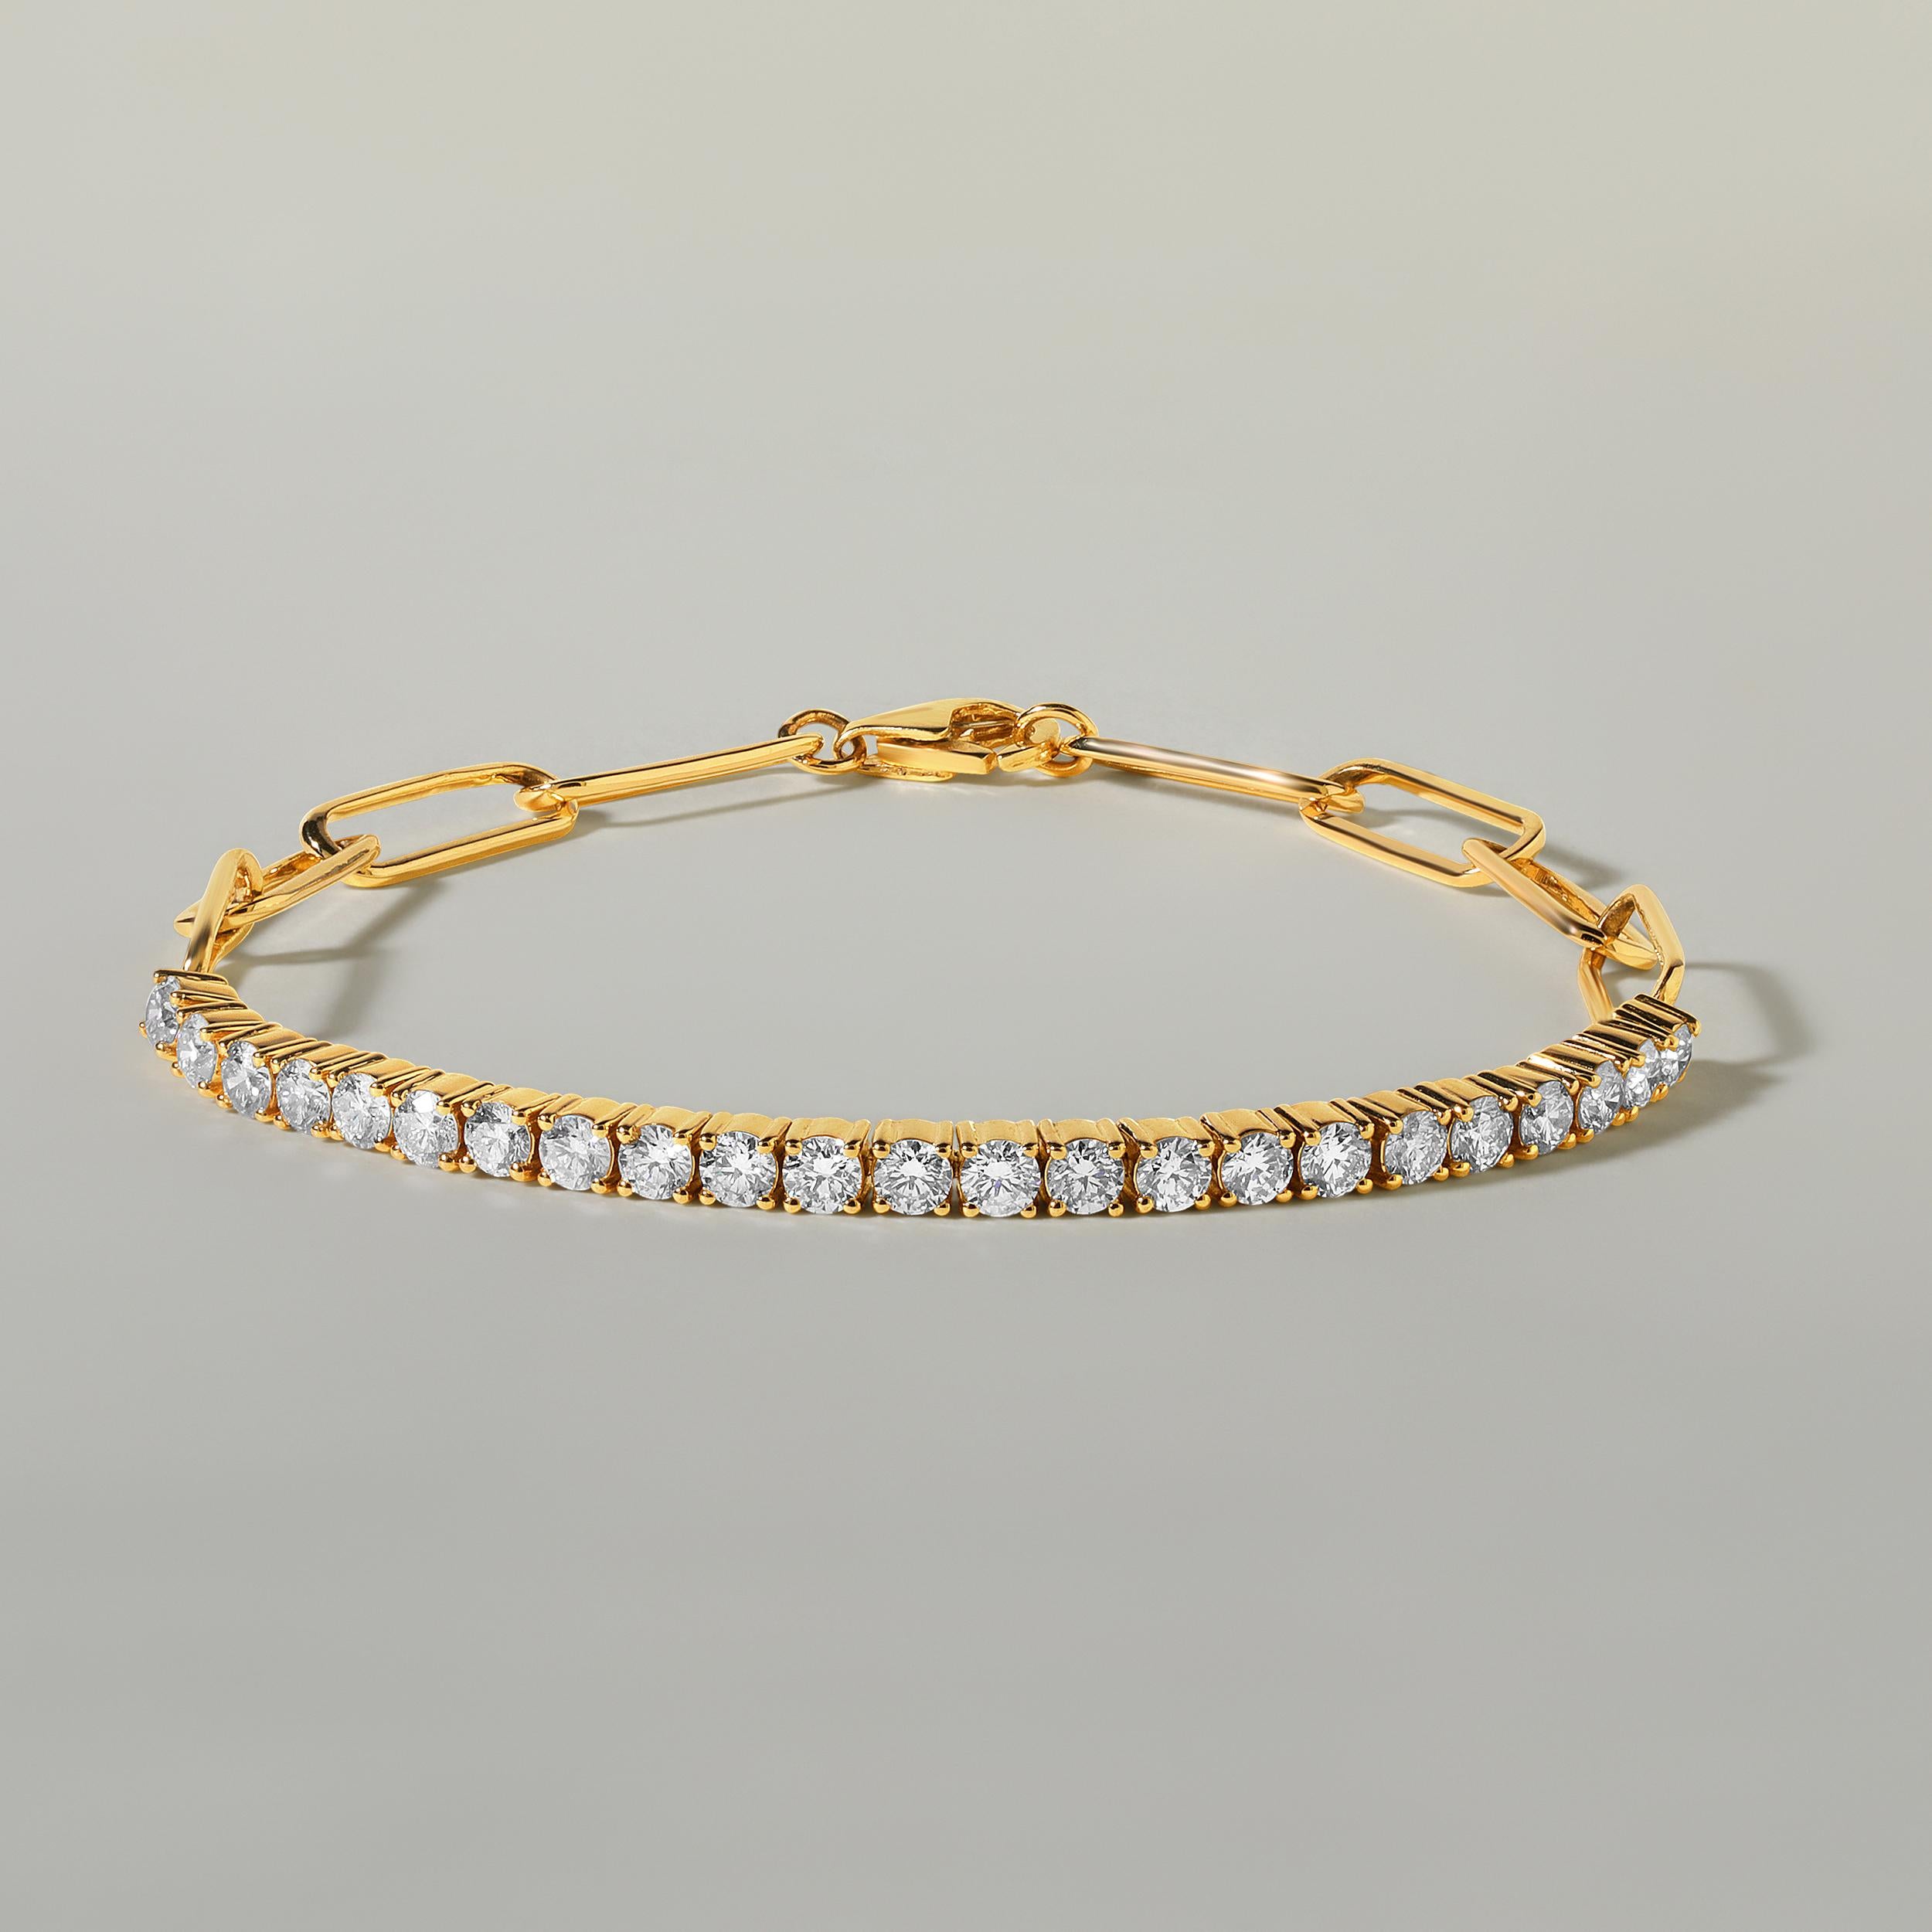 Crafted in 6.93 grams of 14K Yellow Gold, the bracelet contains 23 stones of Round Natural Diamonds with a total of 2.03 carat in G-H color and SI clarity. The bracelet length is 7 inches.
This jewelry piece will be expertly crafted by our skilled